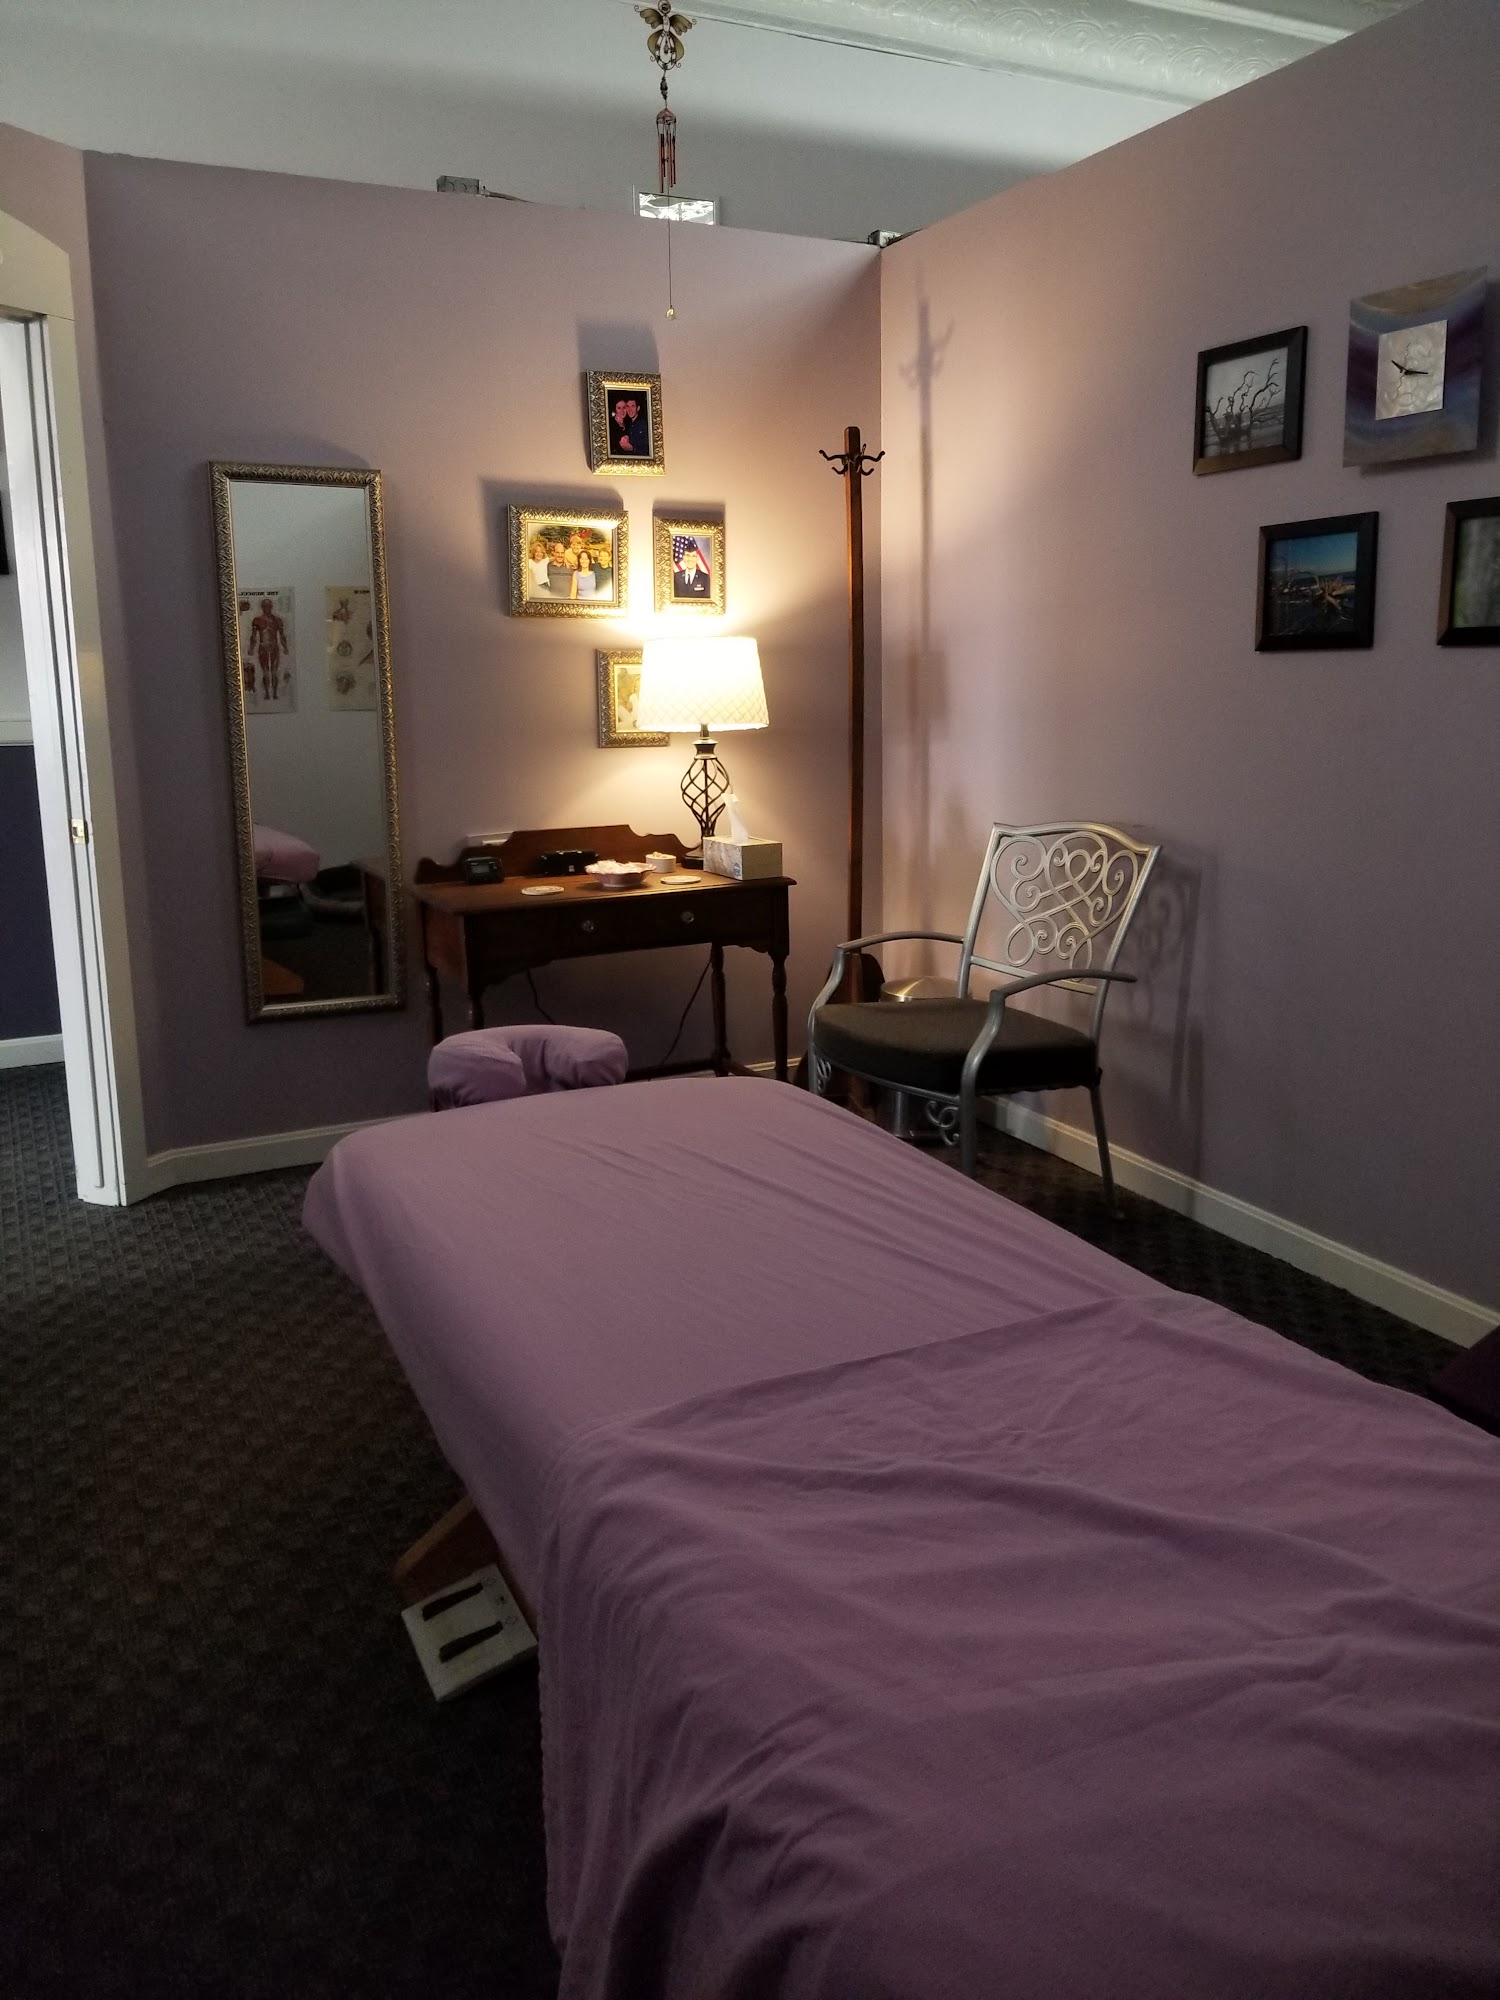 Tammy Johnson LMT, Therapeutic Massage 124 N Mill St Suite A, St. Louis Michigan 48880